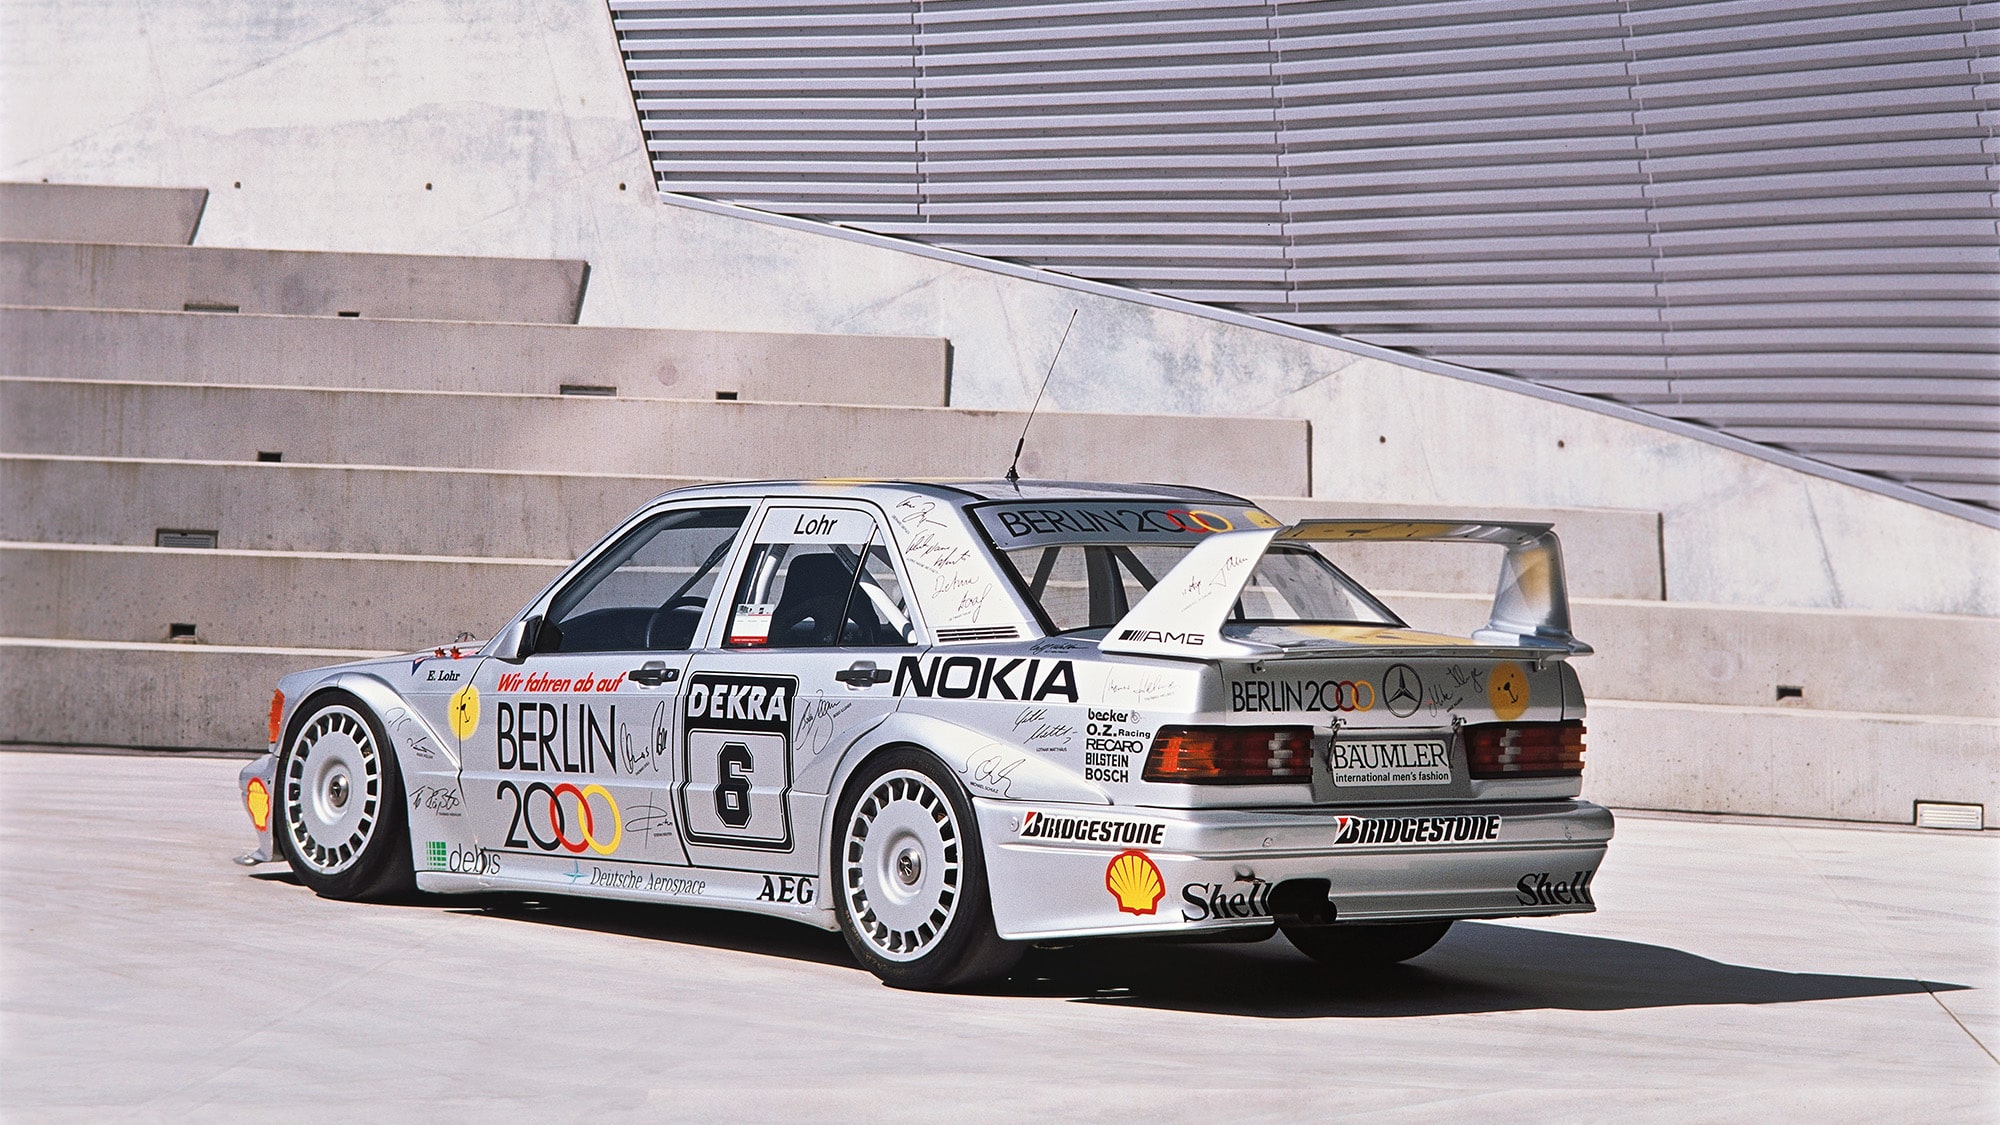 Here's Your Chance To Buy a Rare Mercedes-Benz 190 E Race Car